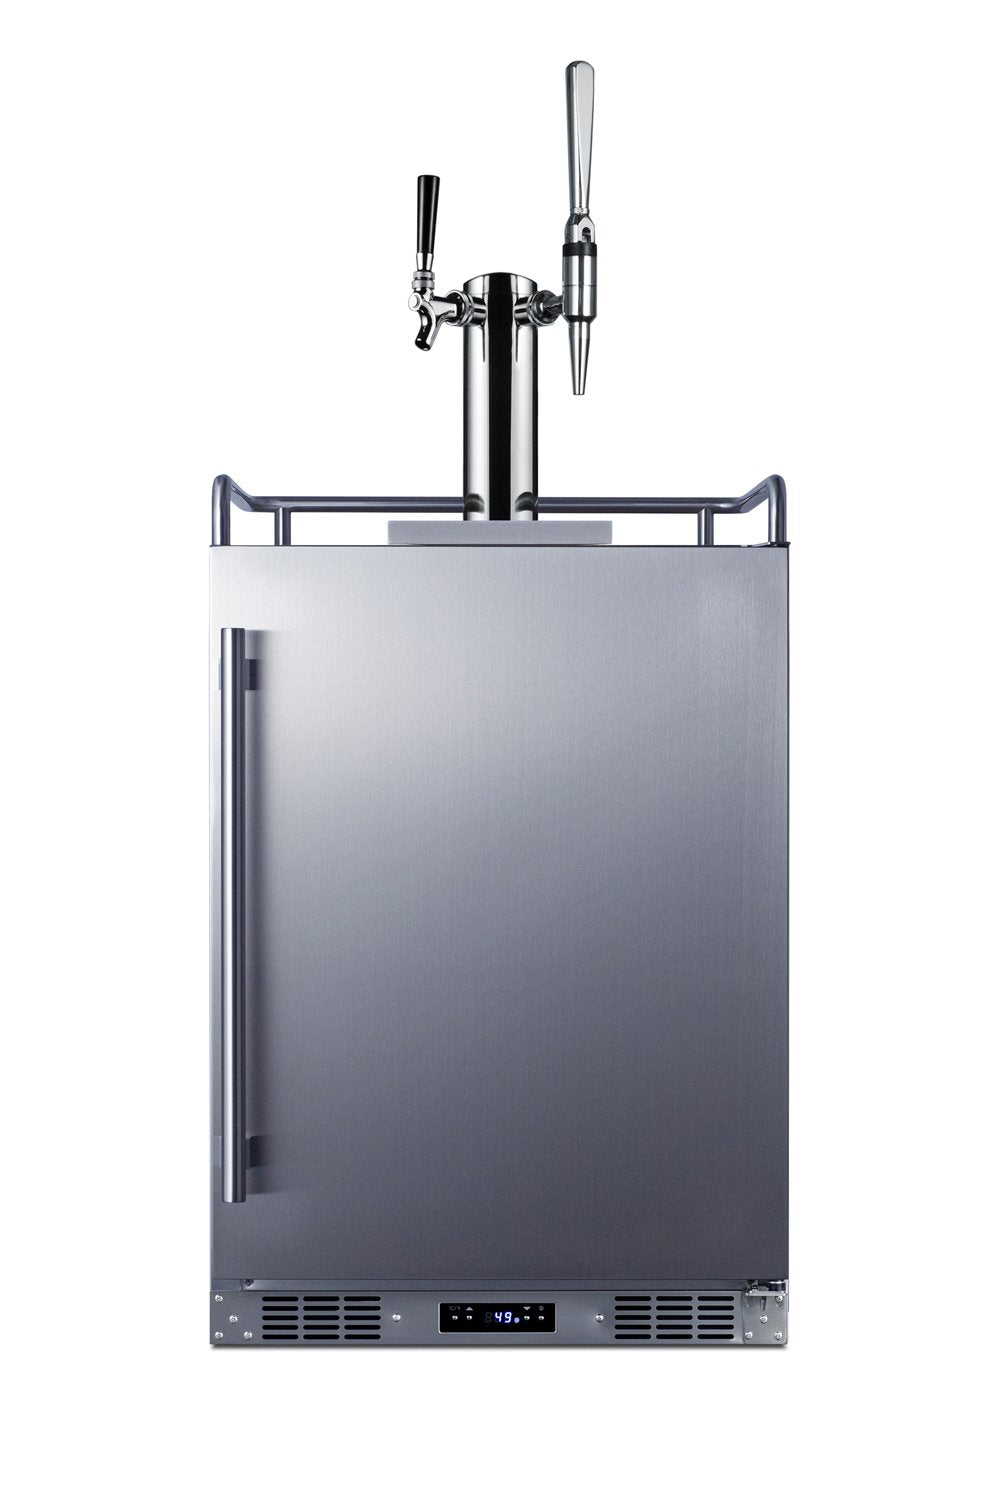 SUMMIT 24 in. Built-In Cold Brew/Nitro-Infused Coffee Kegerator (SBC682CMTWIN)